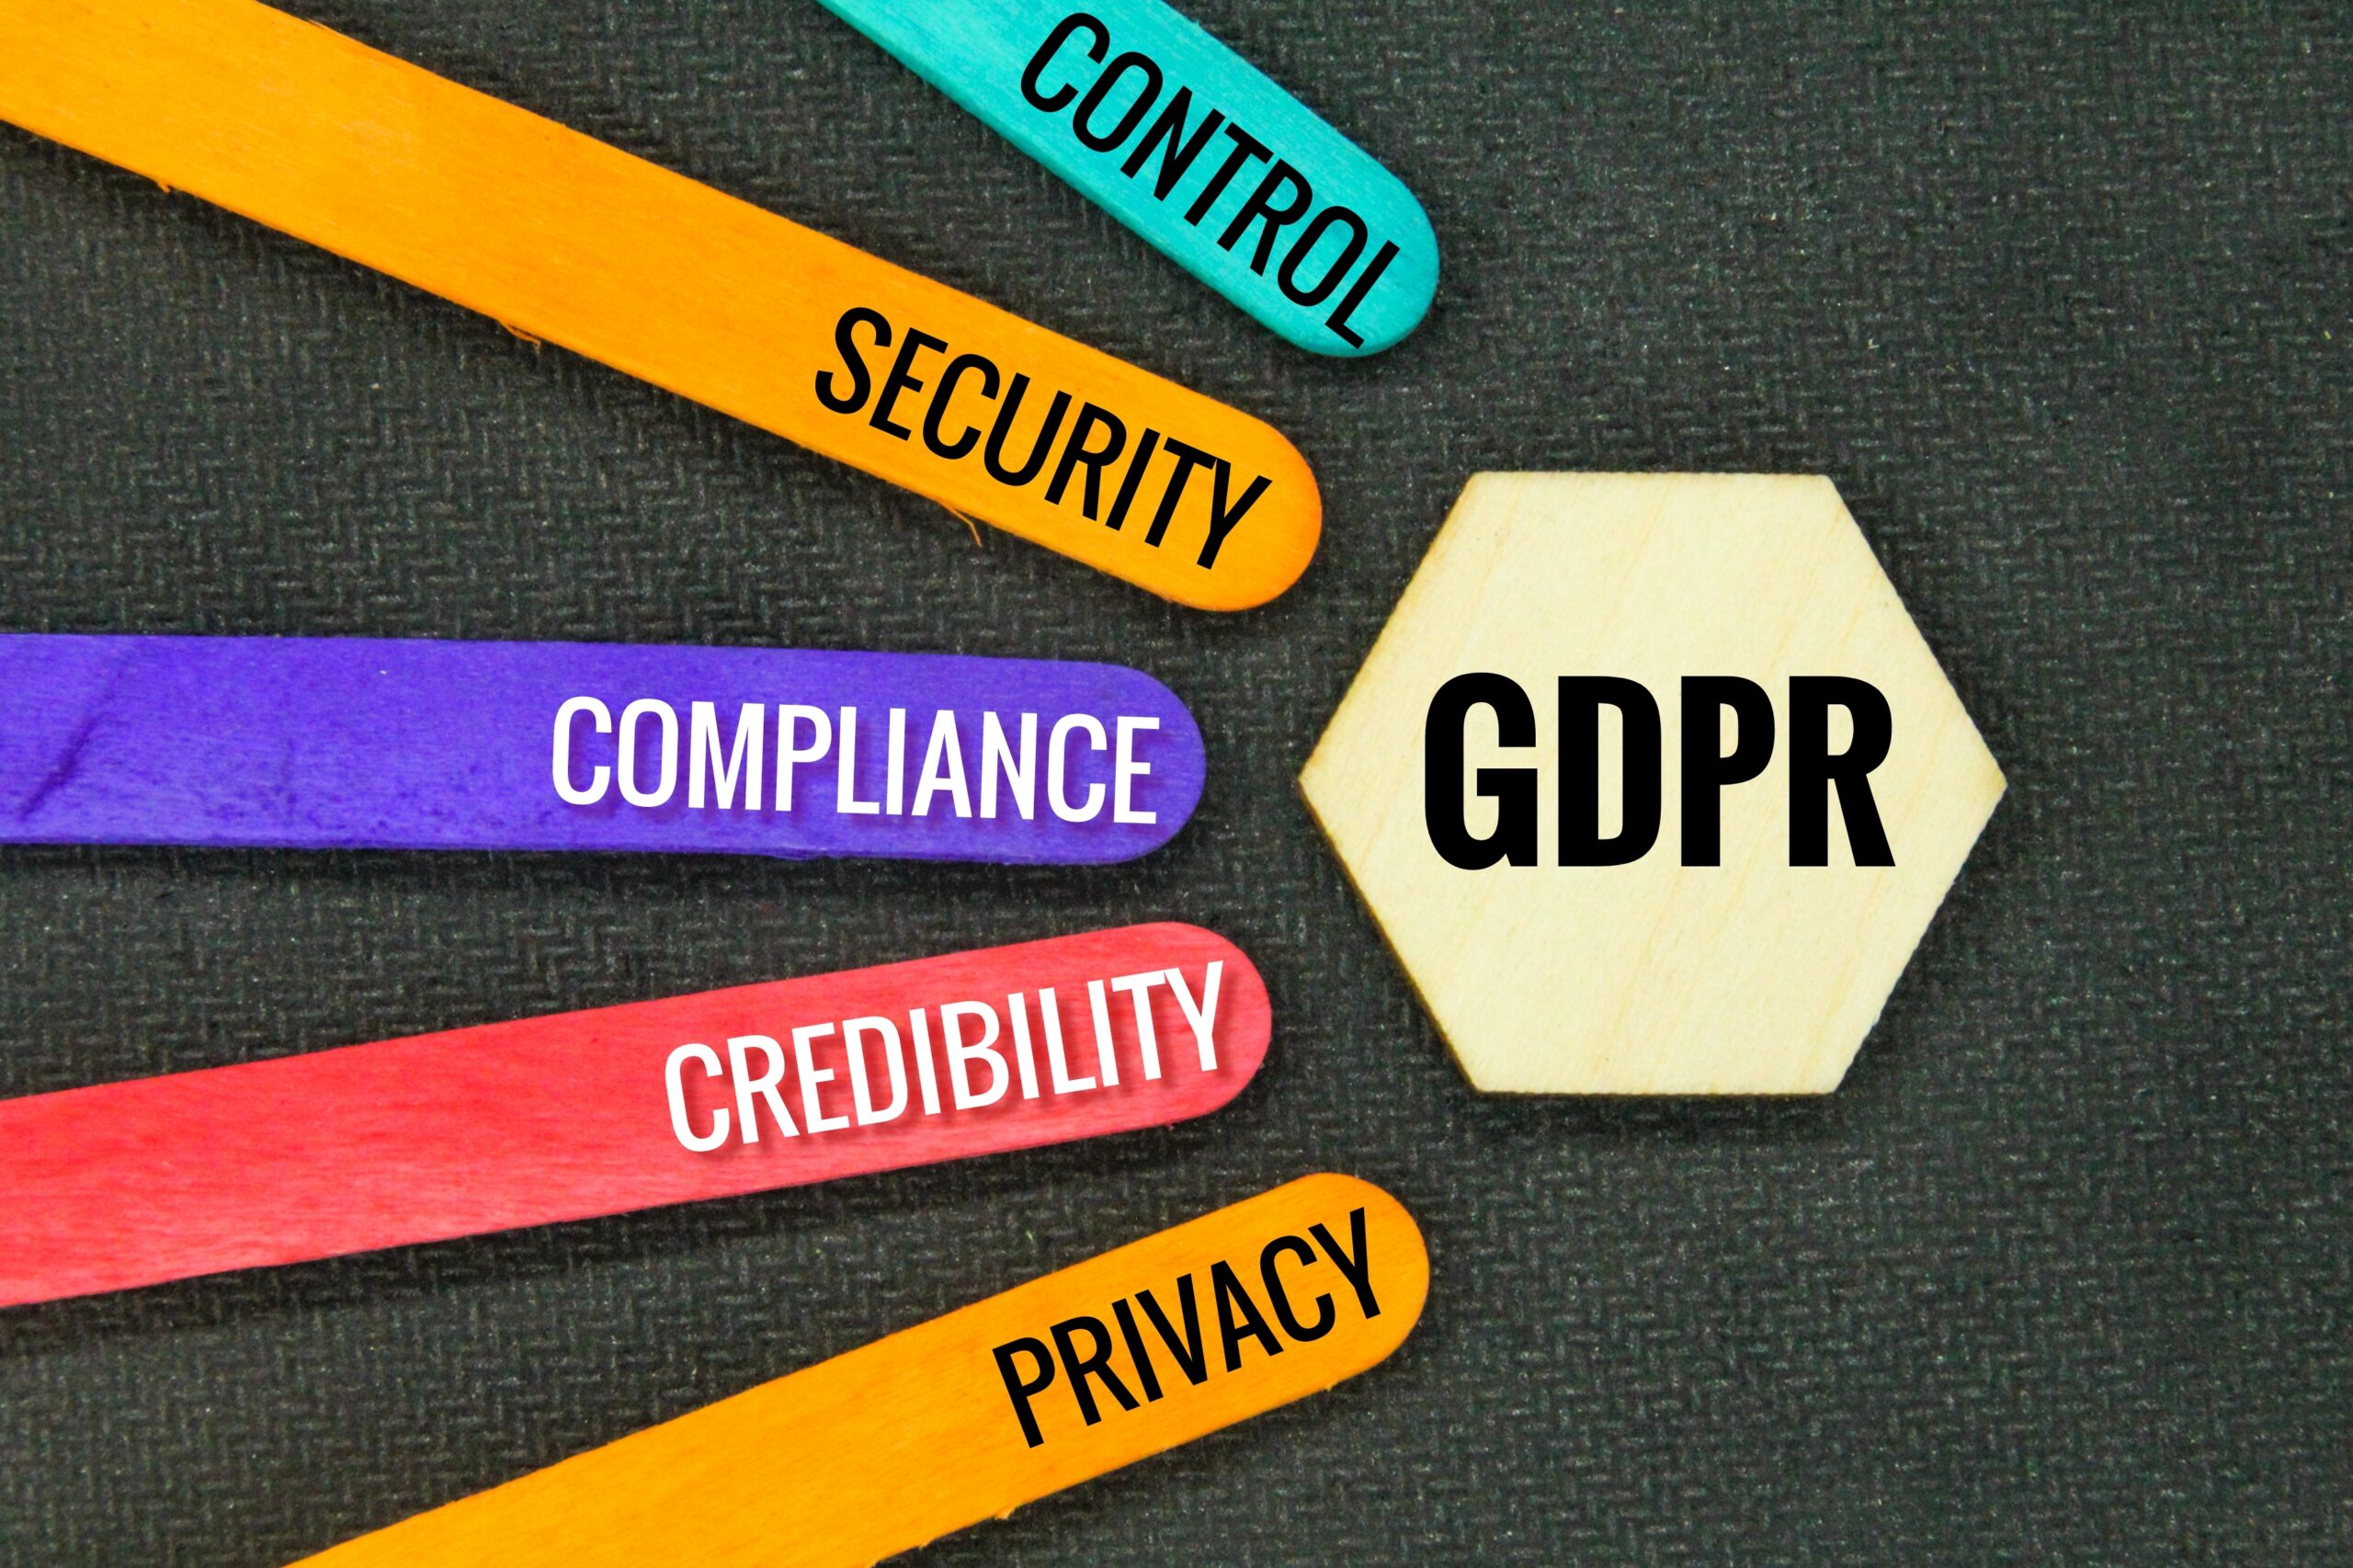 Graphic showing Control, Security, Compliance, Credibility and Privacy are part of GDPR